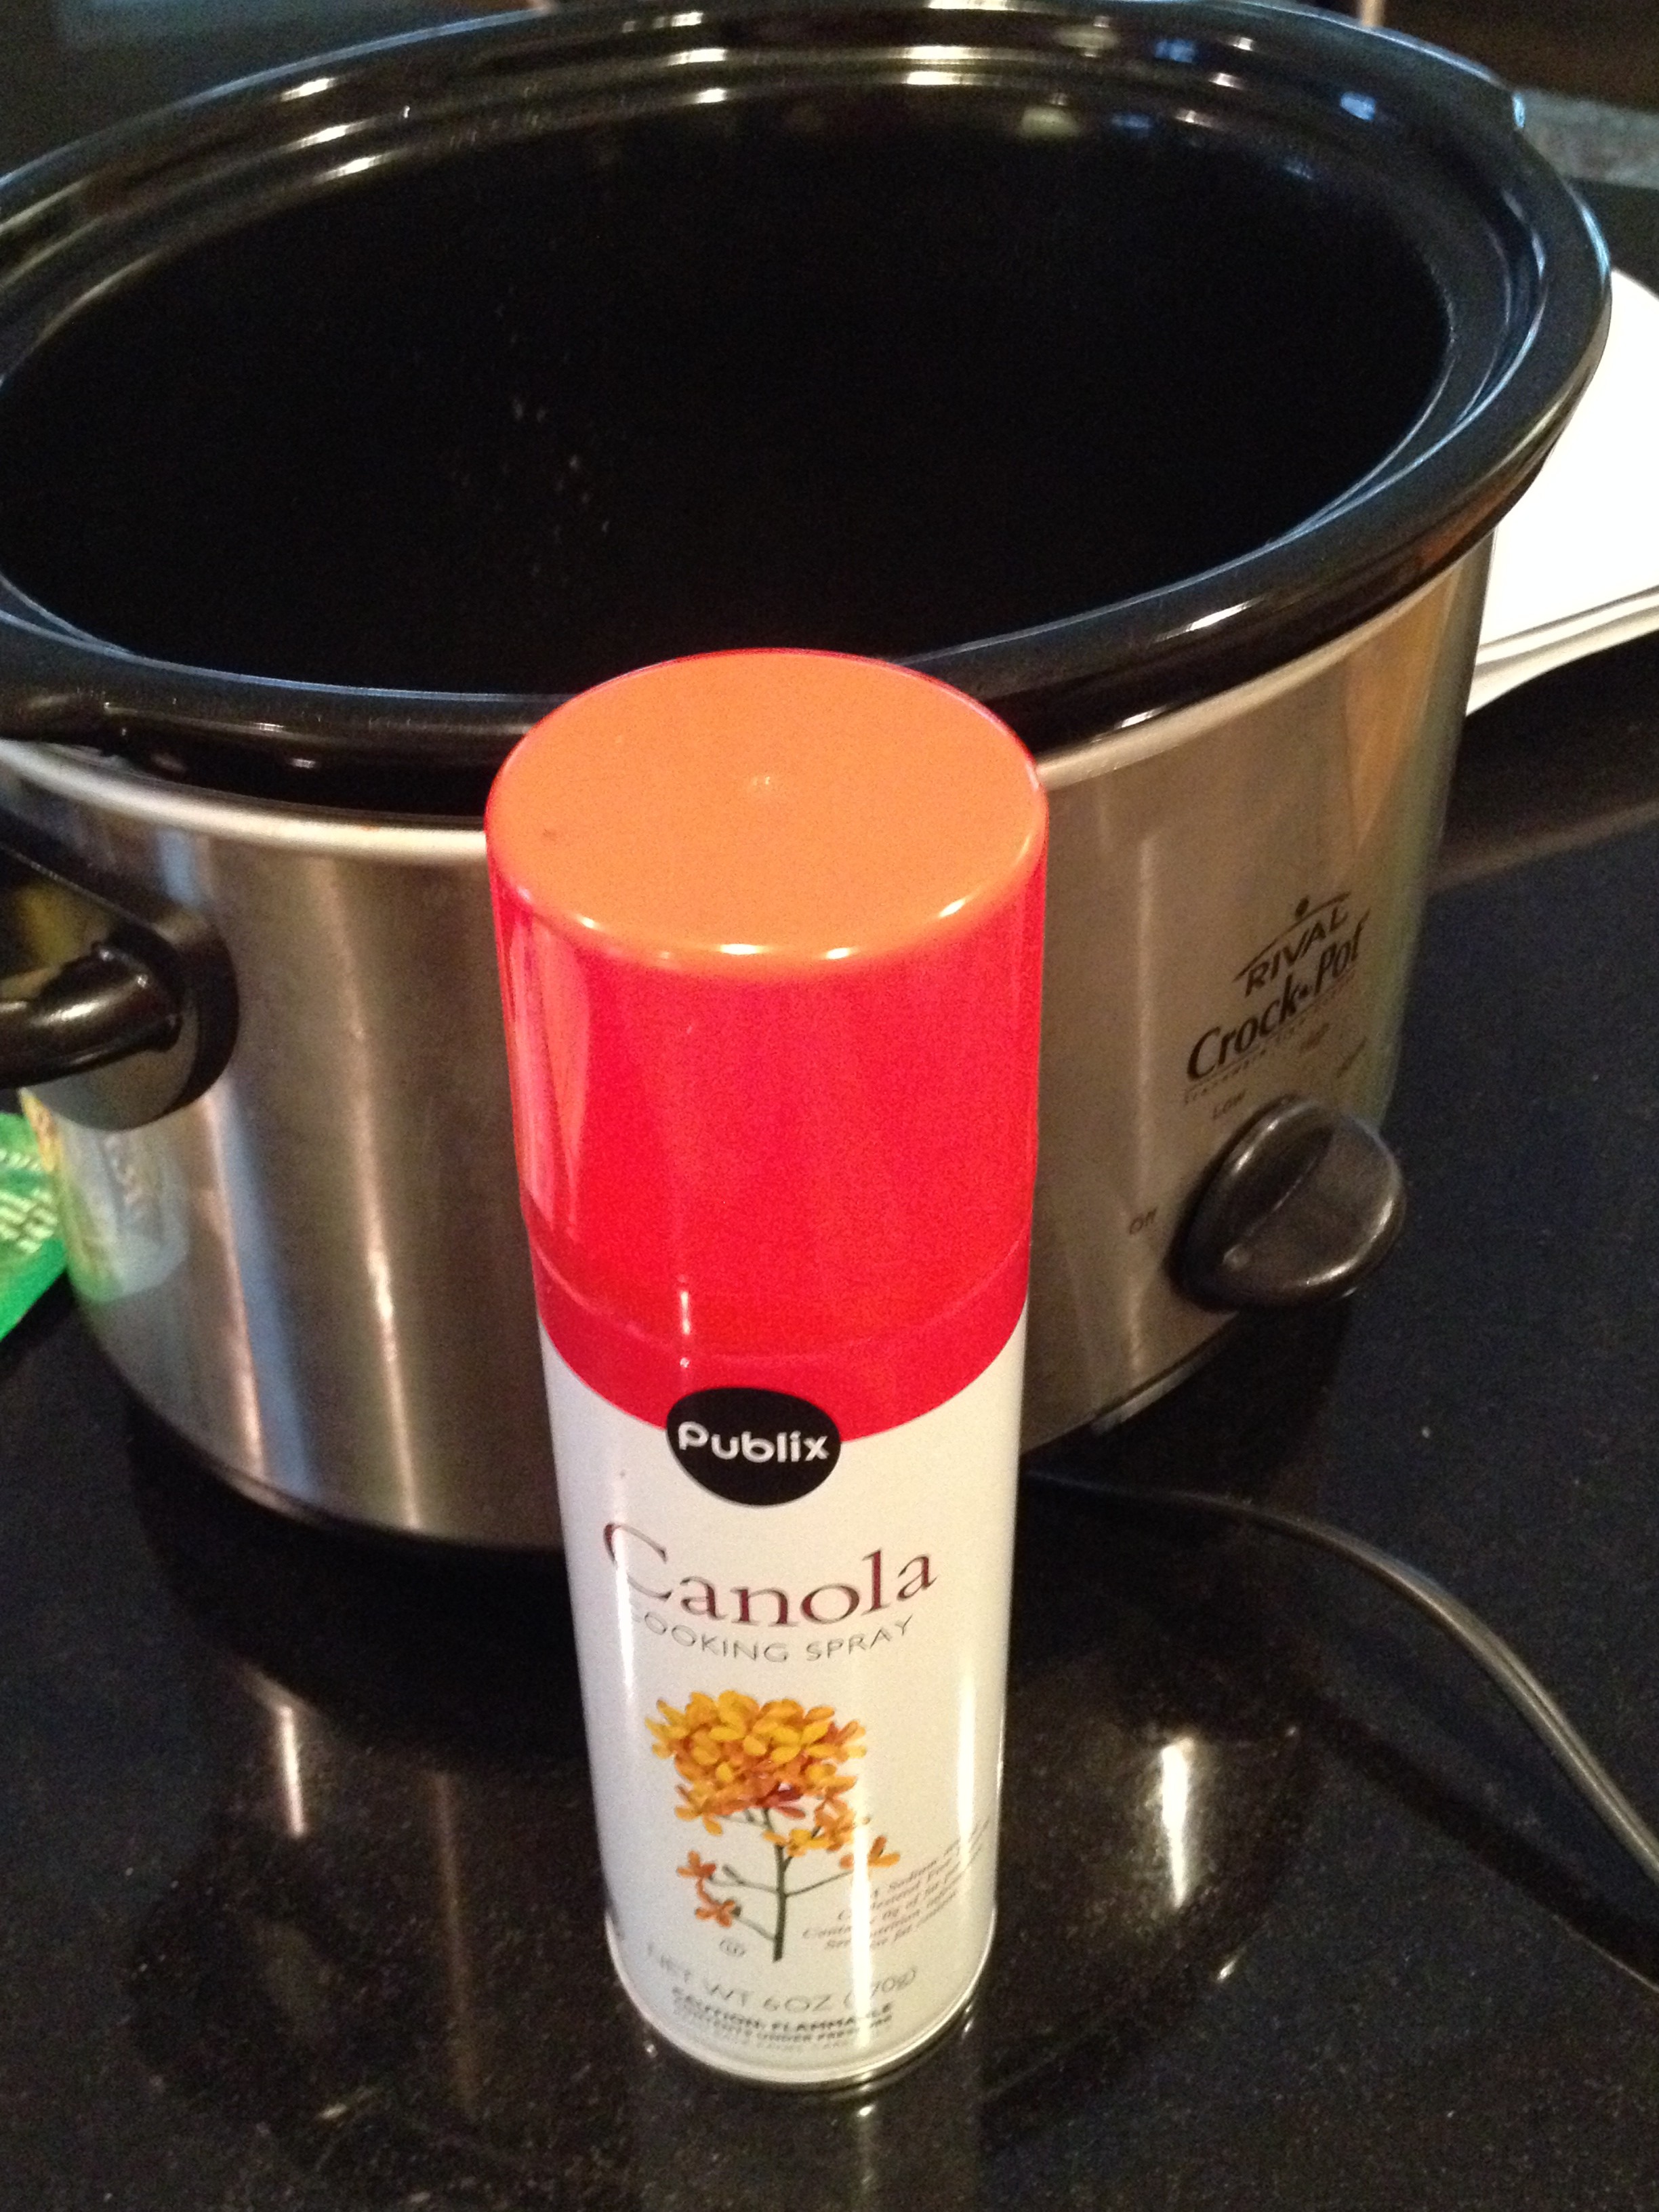 Spray crock pot with cooking spray - makes for easier clean up.